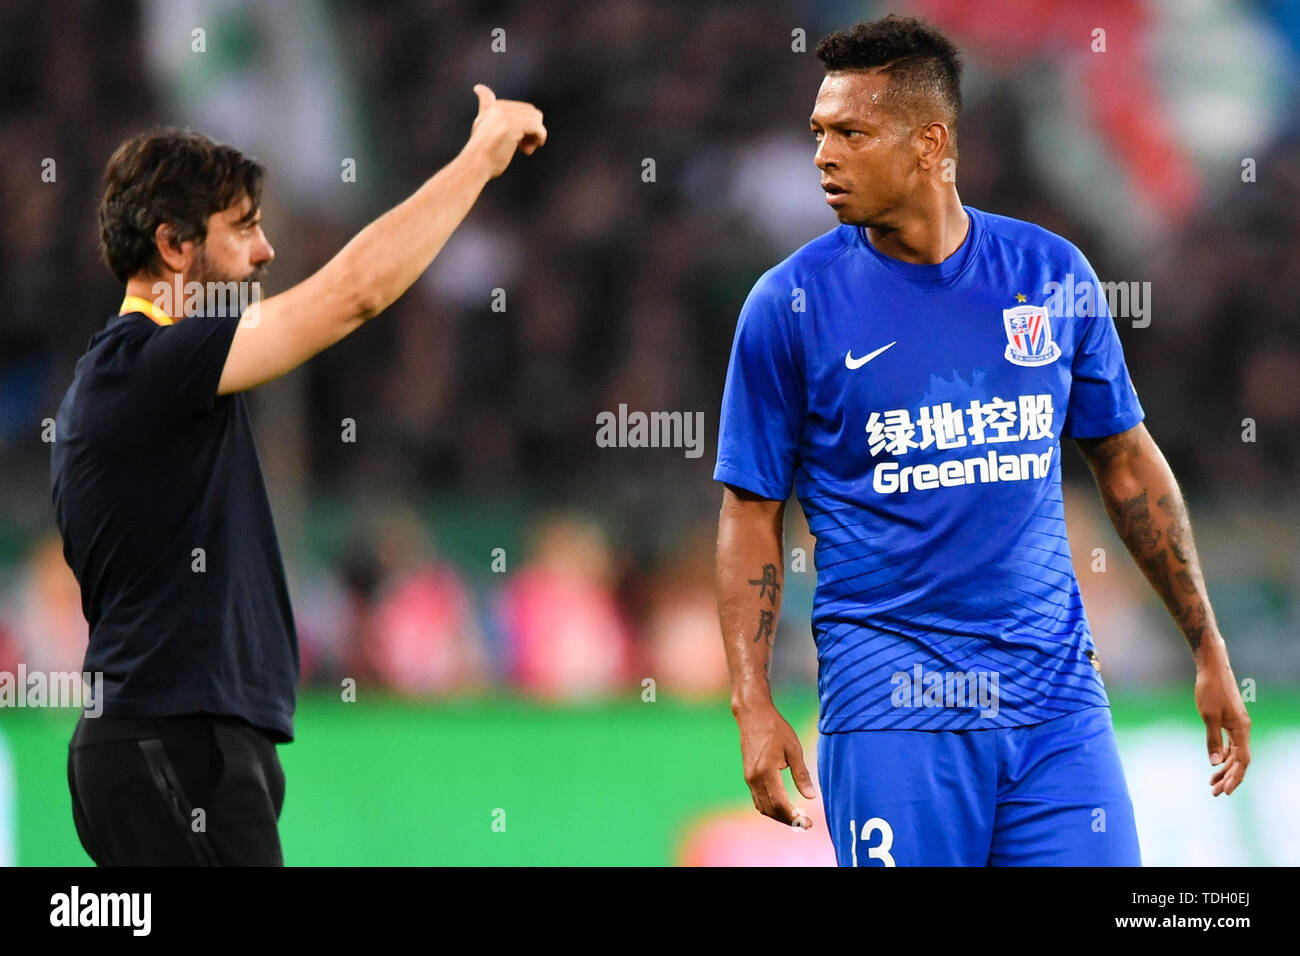 Colombian football player Giovanni Moreno of Shanghai Greenland Shenhua celebrates with head coach Quique Sanchez Flores after scoring against Beijing Sinobo Guoan in their 13th round match during the 2019 Chinese Football Association Super League (CSL) in Beijing, China, 14 June 2019.  Beijing Sinobo Guoan defeated Shanghai Greenland Shenhua 2-1. Stock Photo